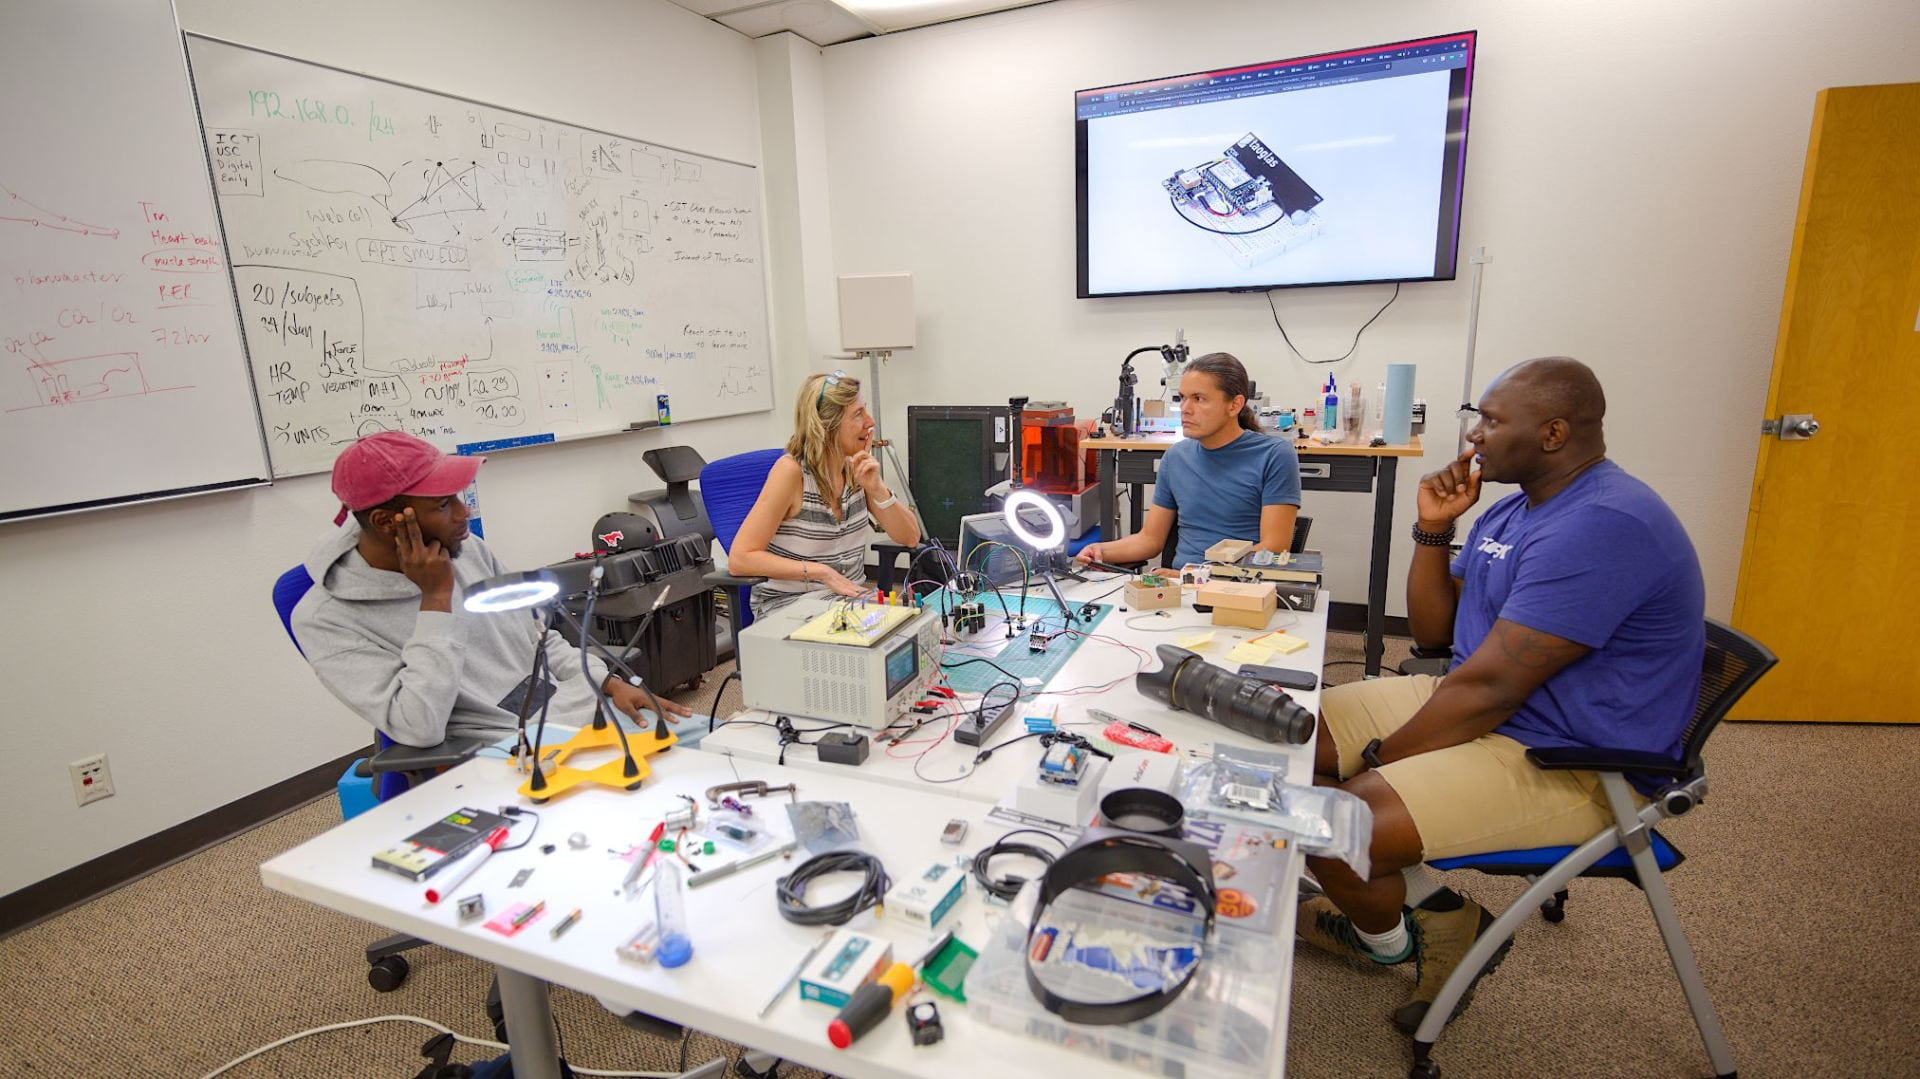 A group of people meeting in a lab at a table filled with equipment.